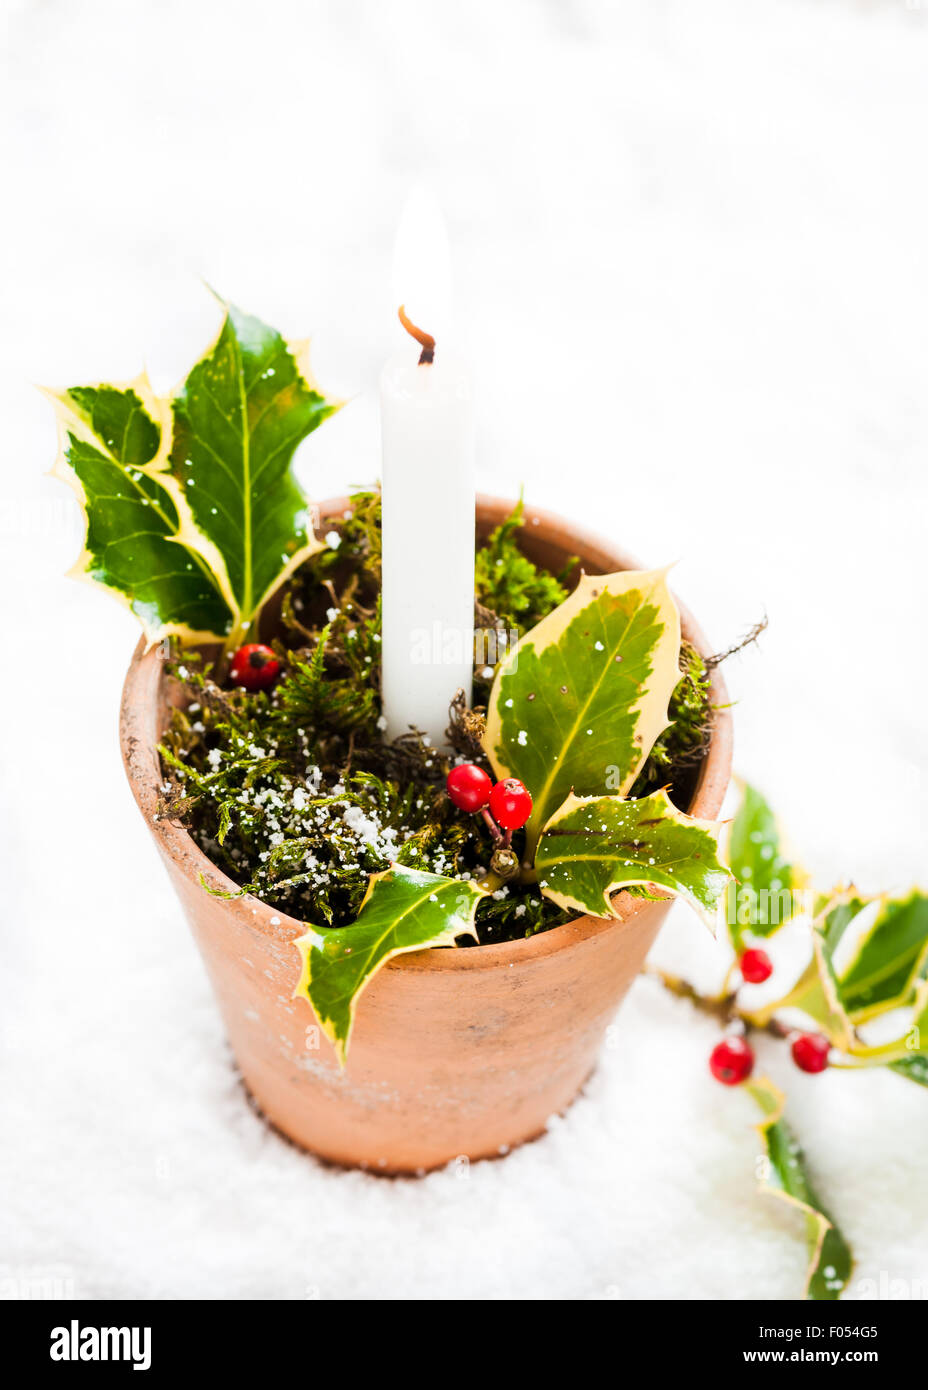 A candle holder made out of a vintage terracotta pot decorated with moss and a spring of holly Stock Photo